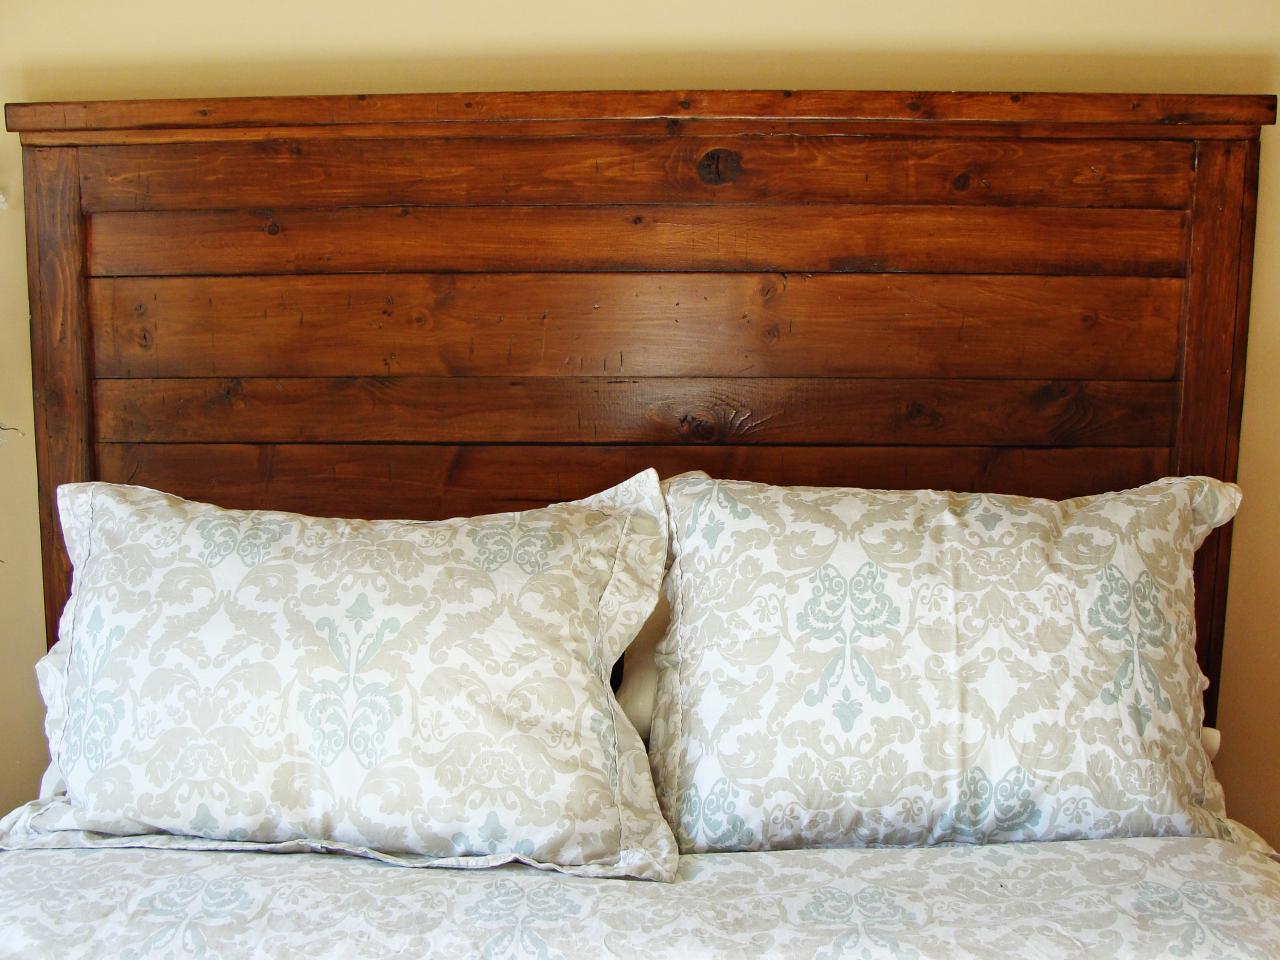 How To Build A Rustic Wood Headboard Tos Diy - Reclaimed Wood Bed Frame Diy